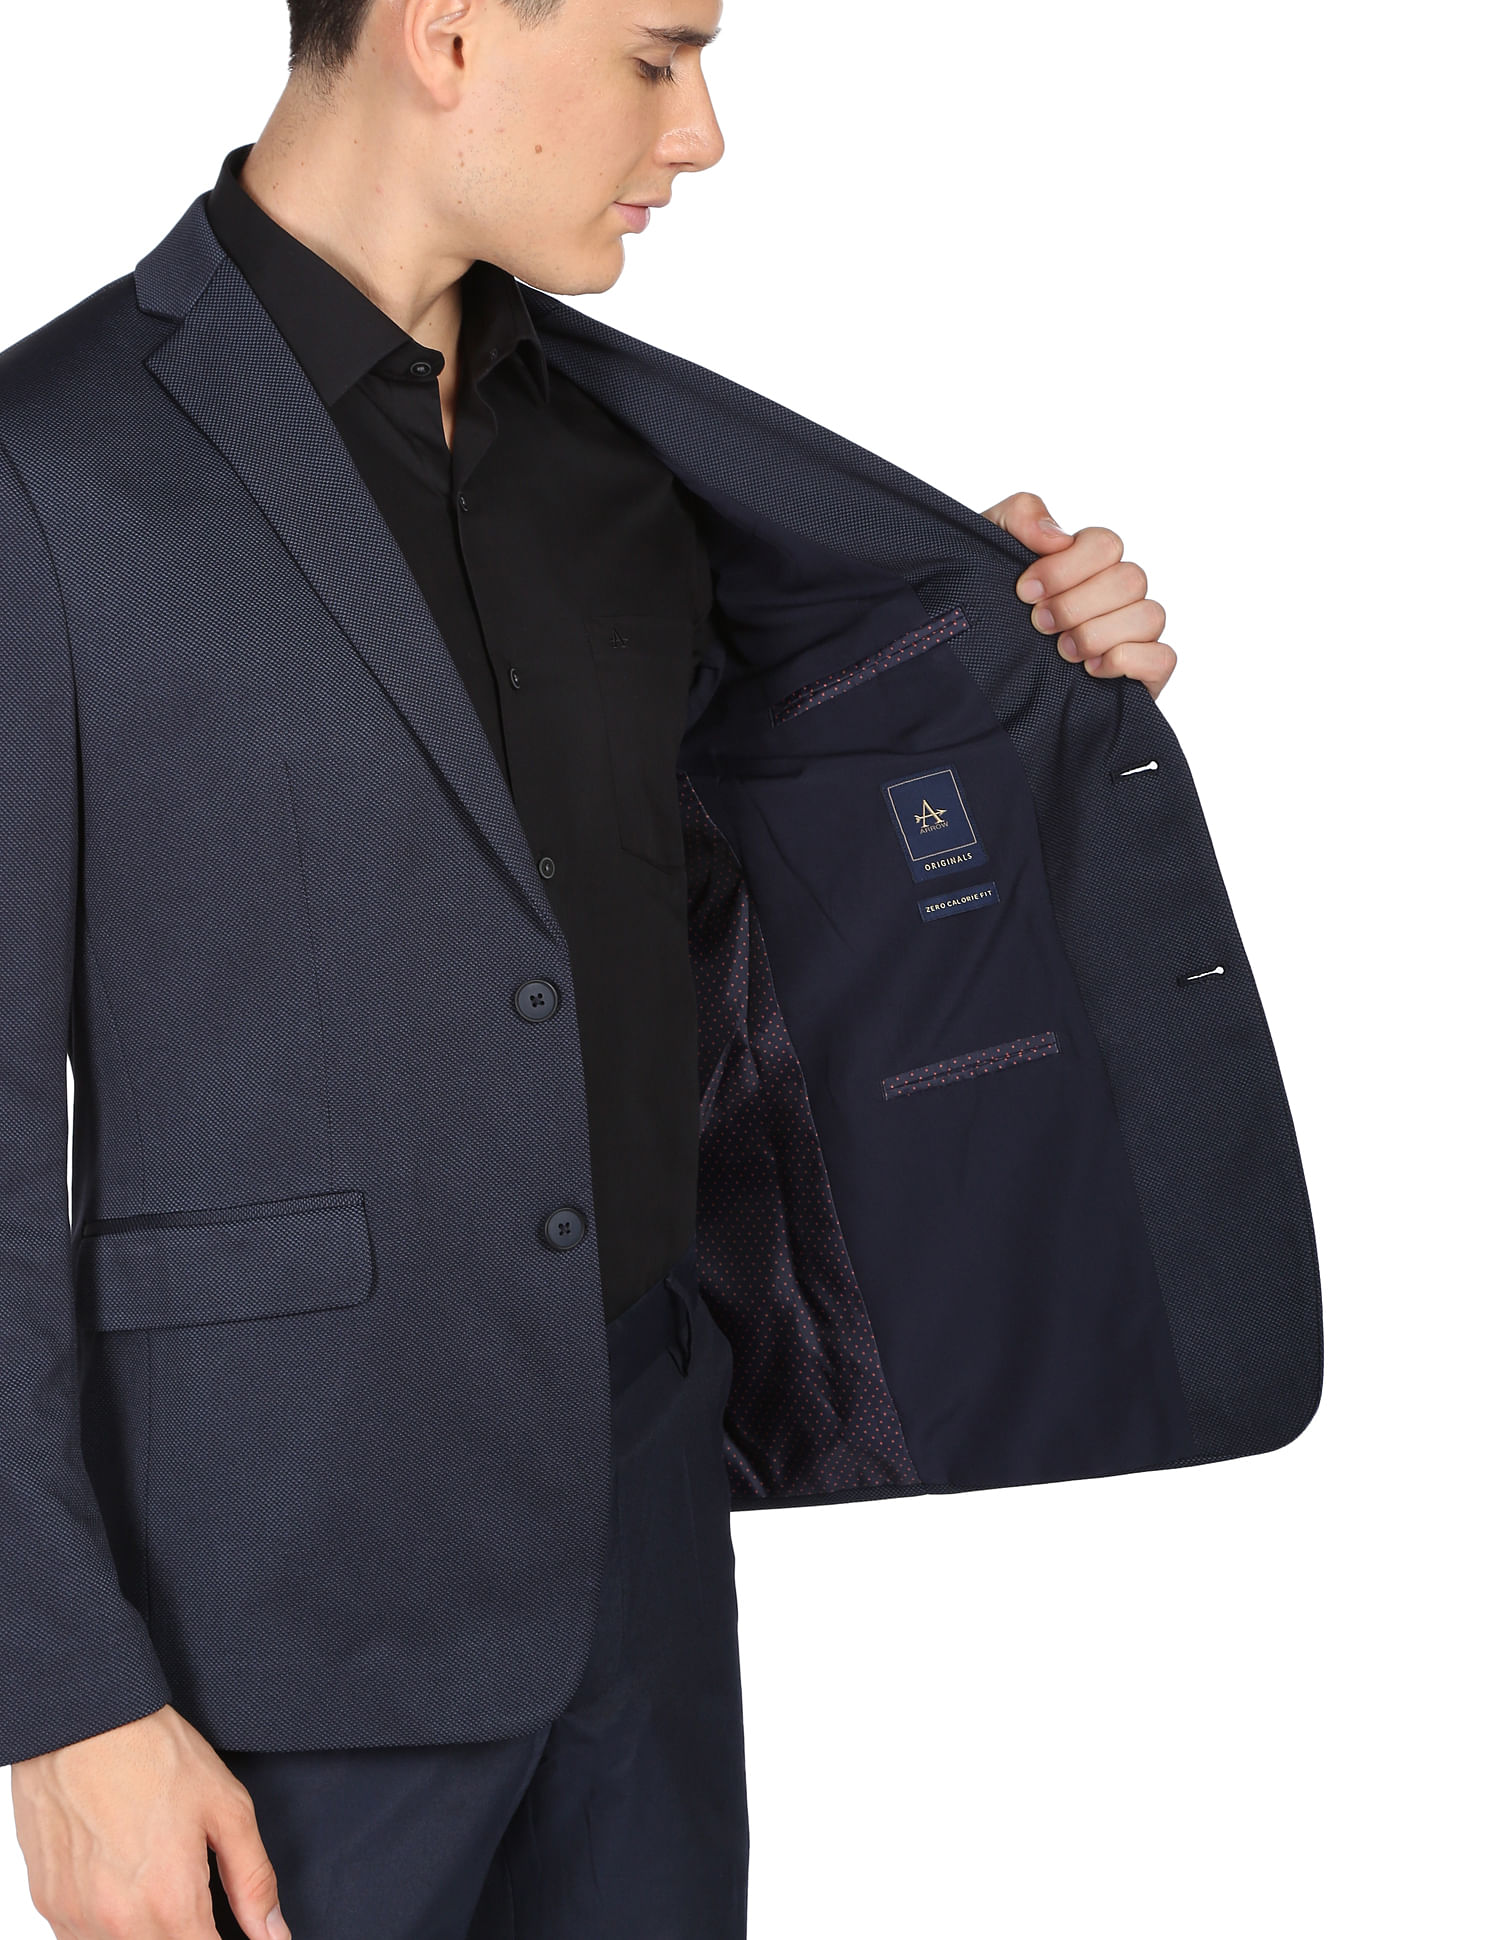 AK MC double breasted blazer in navy linen with bespoke domed